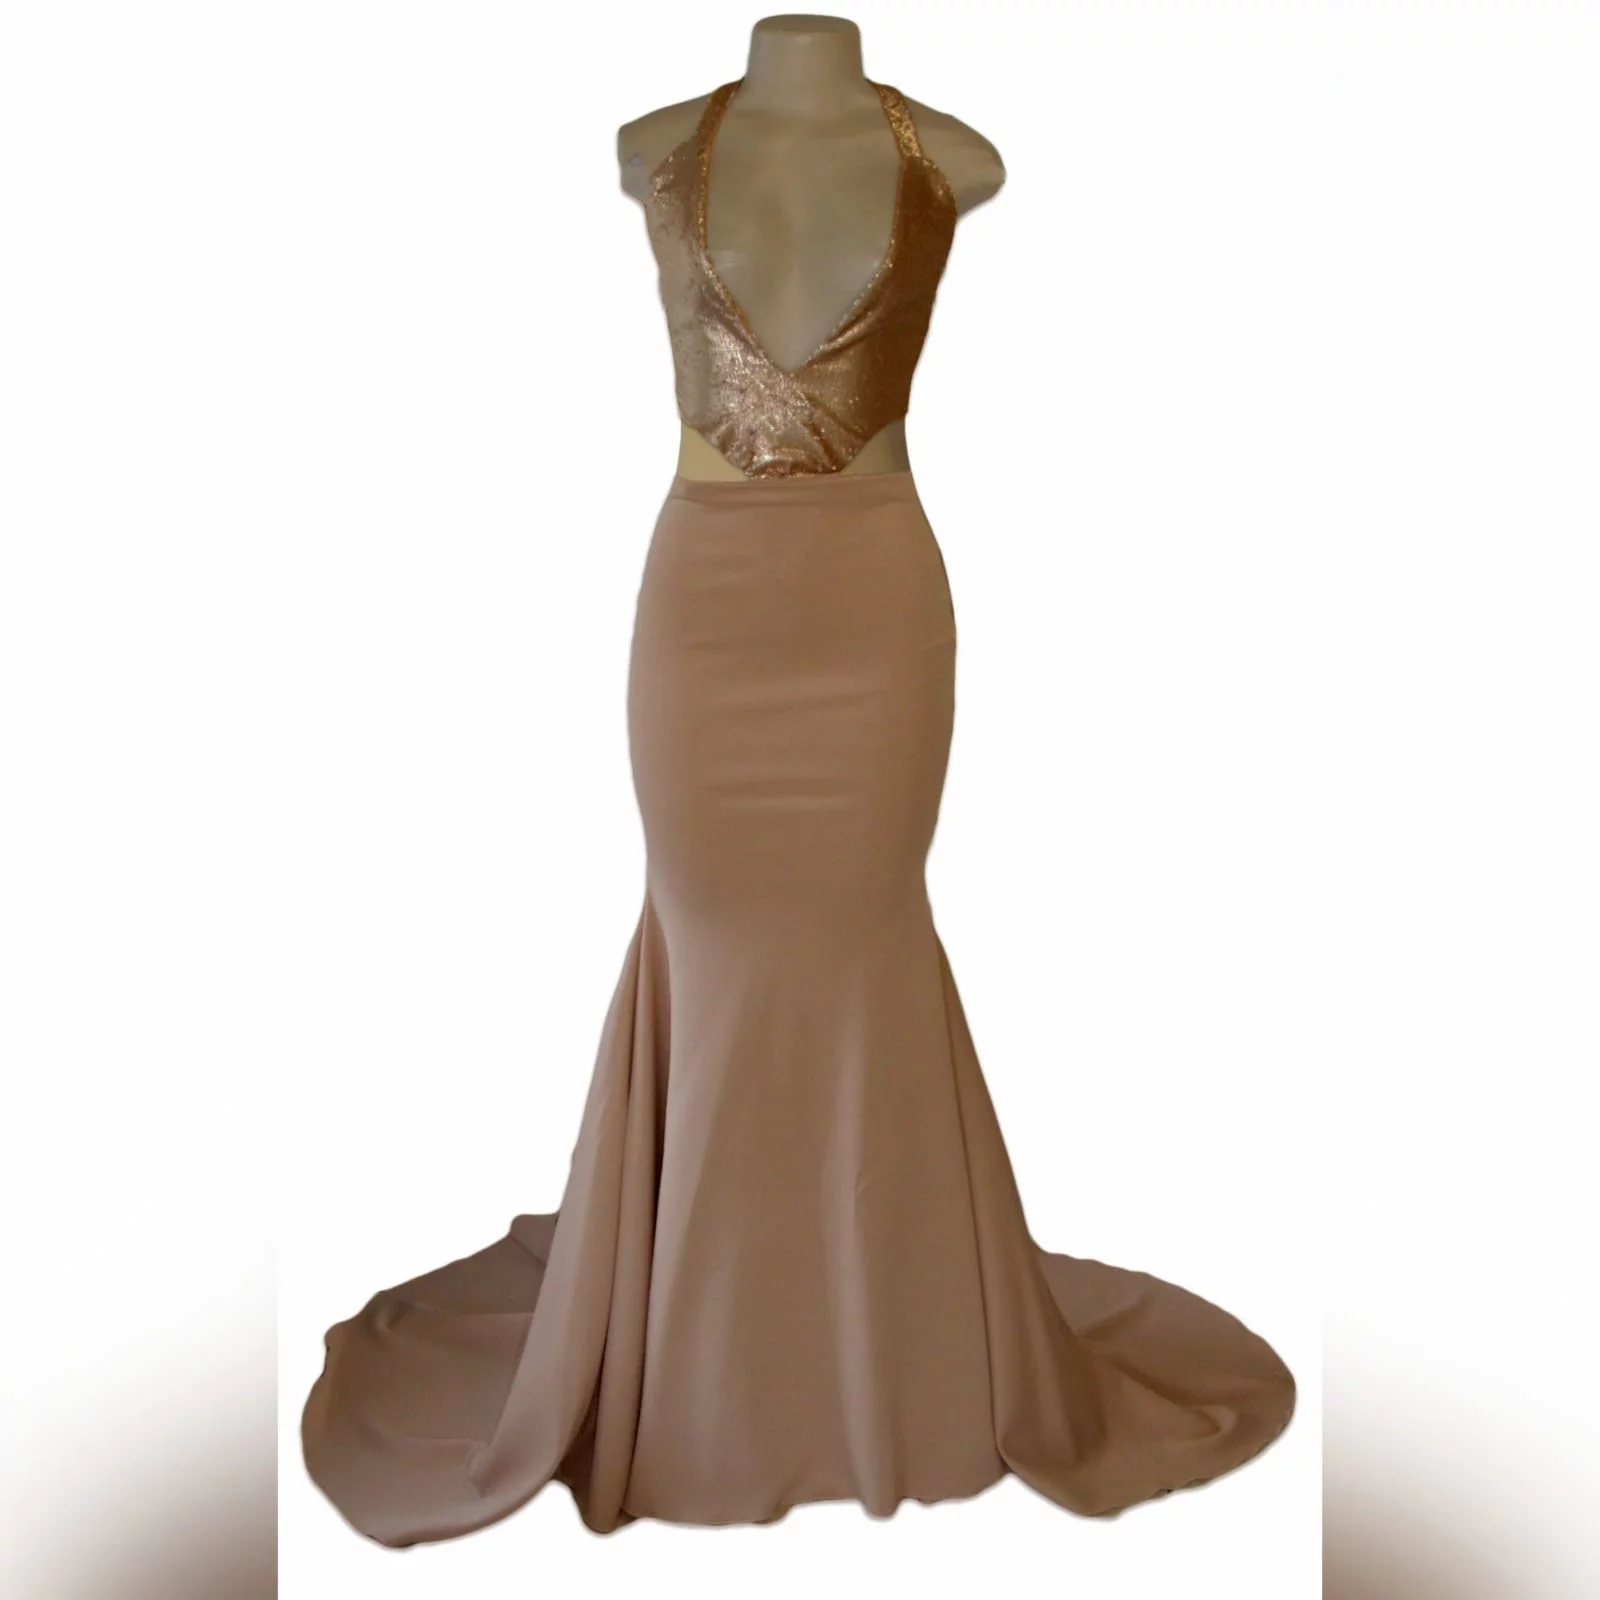 Nude and gold soft mermaid prom dress 4 nude and gold soft mermaid prom dress. Bodice in sequins with a plunging neckline and a naked back detailed with straps. Bottom with a long wide train.